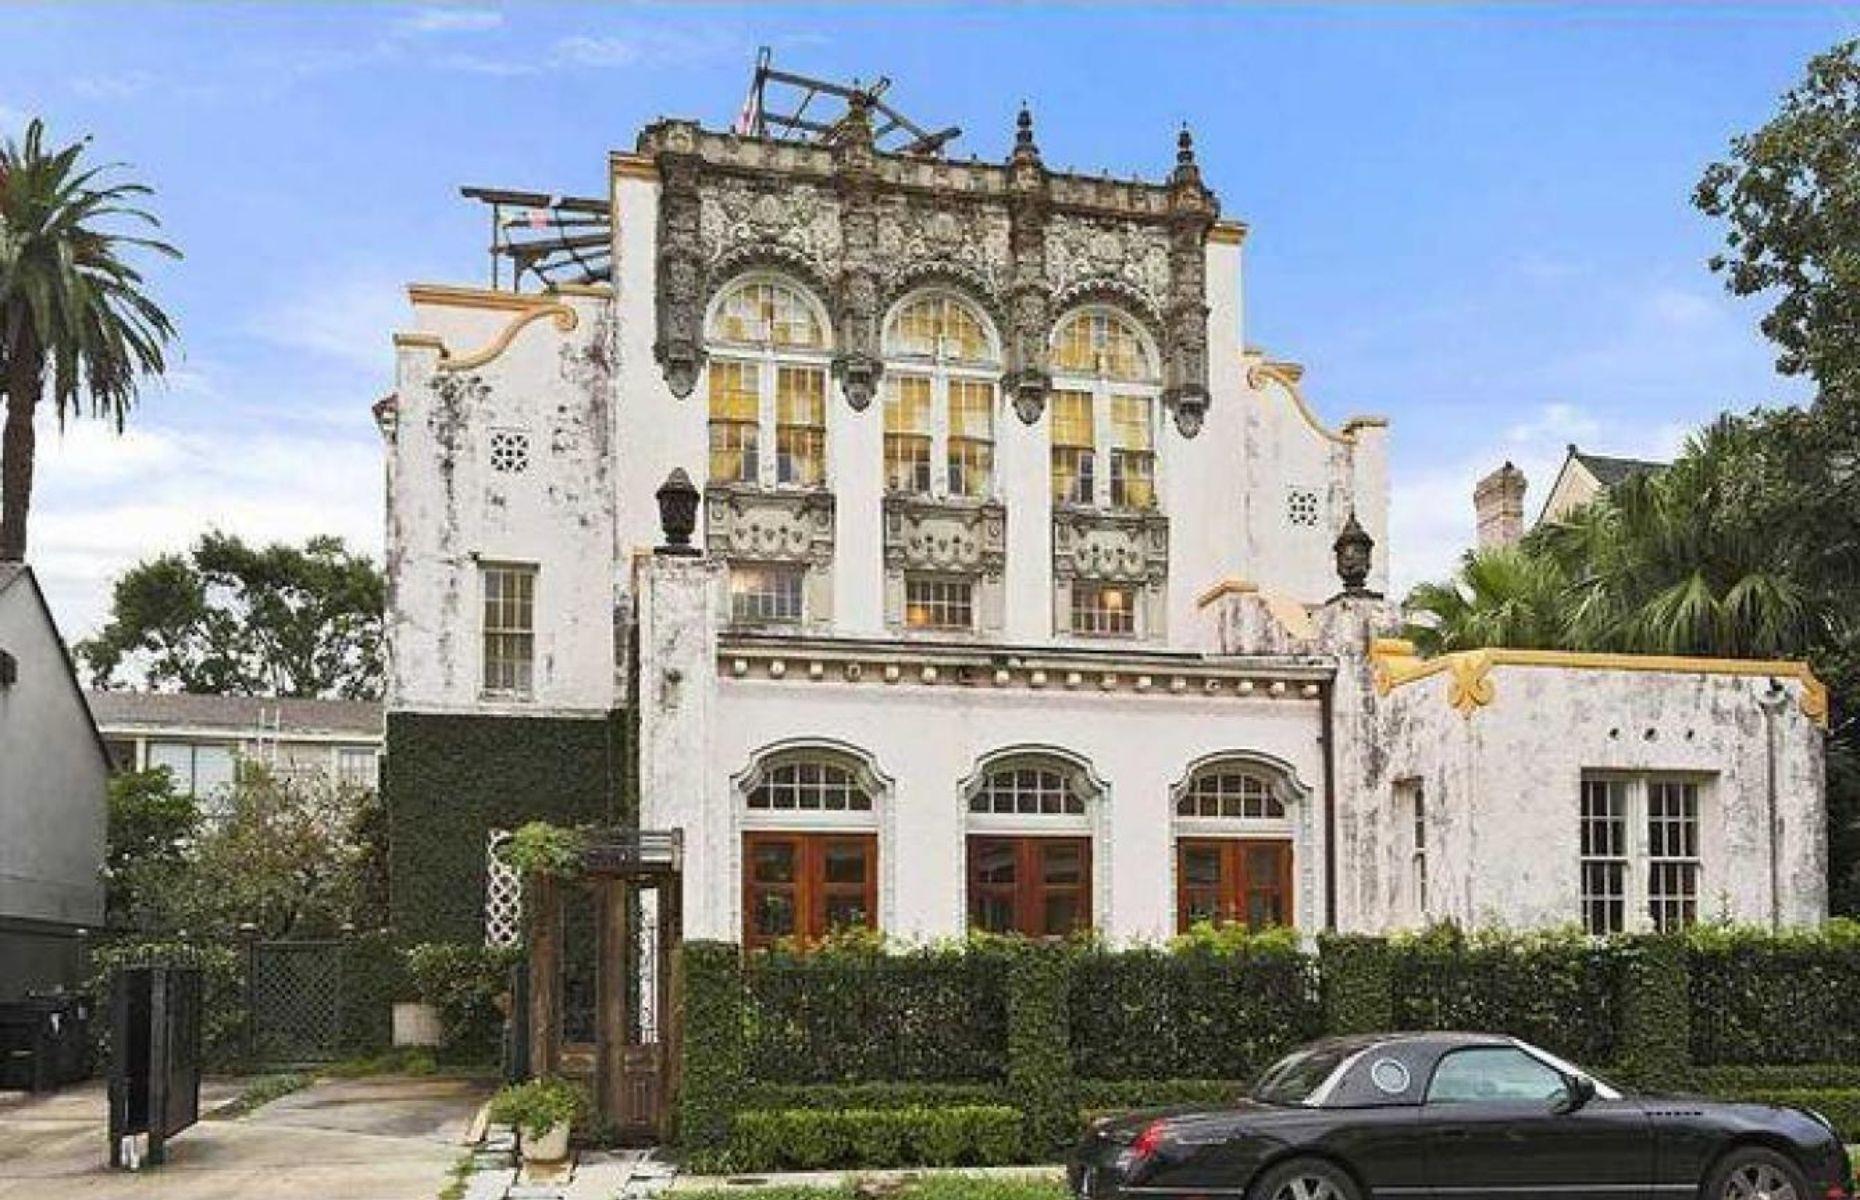 Jay-Z and Beyonce spent their summer in this luxurious rental